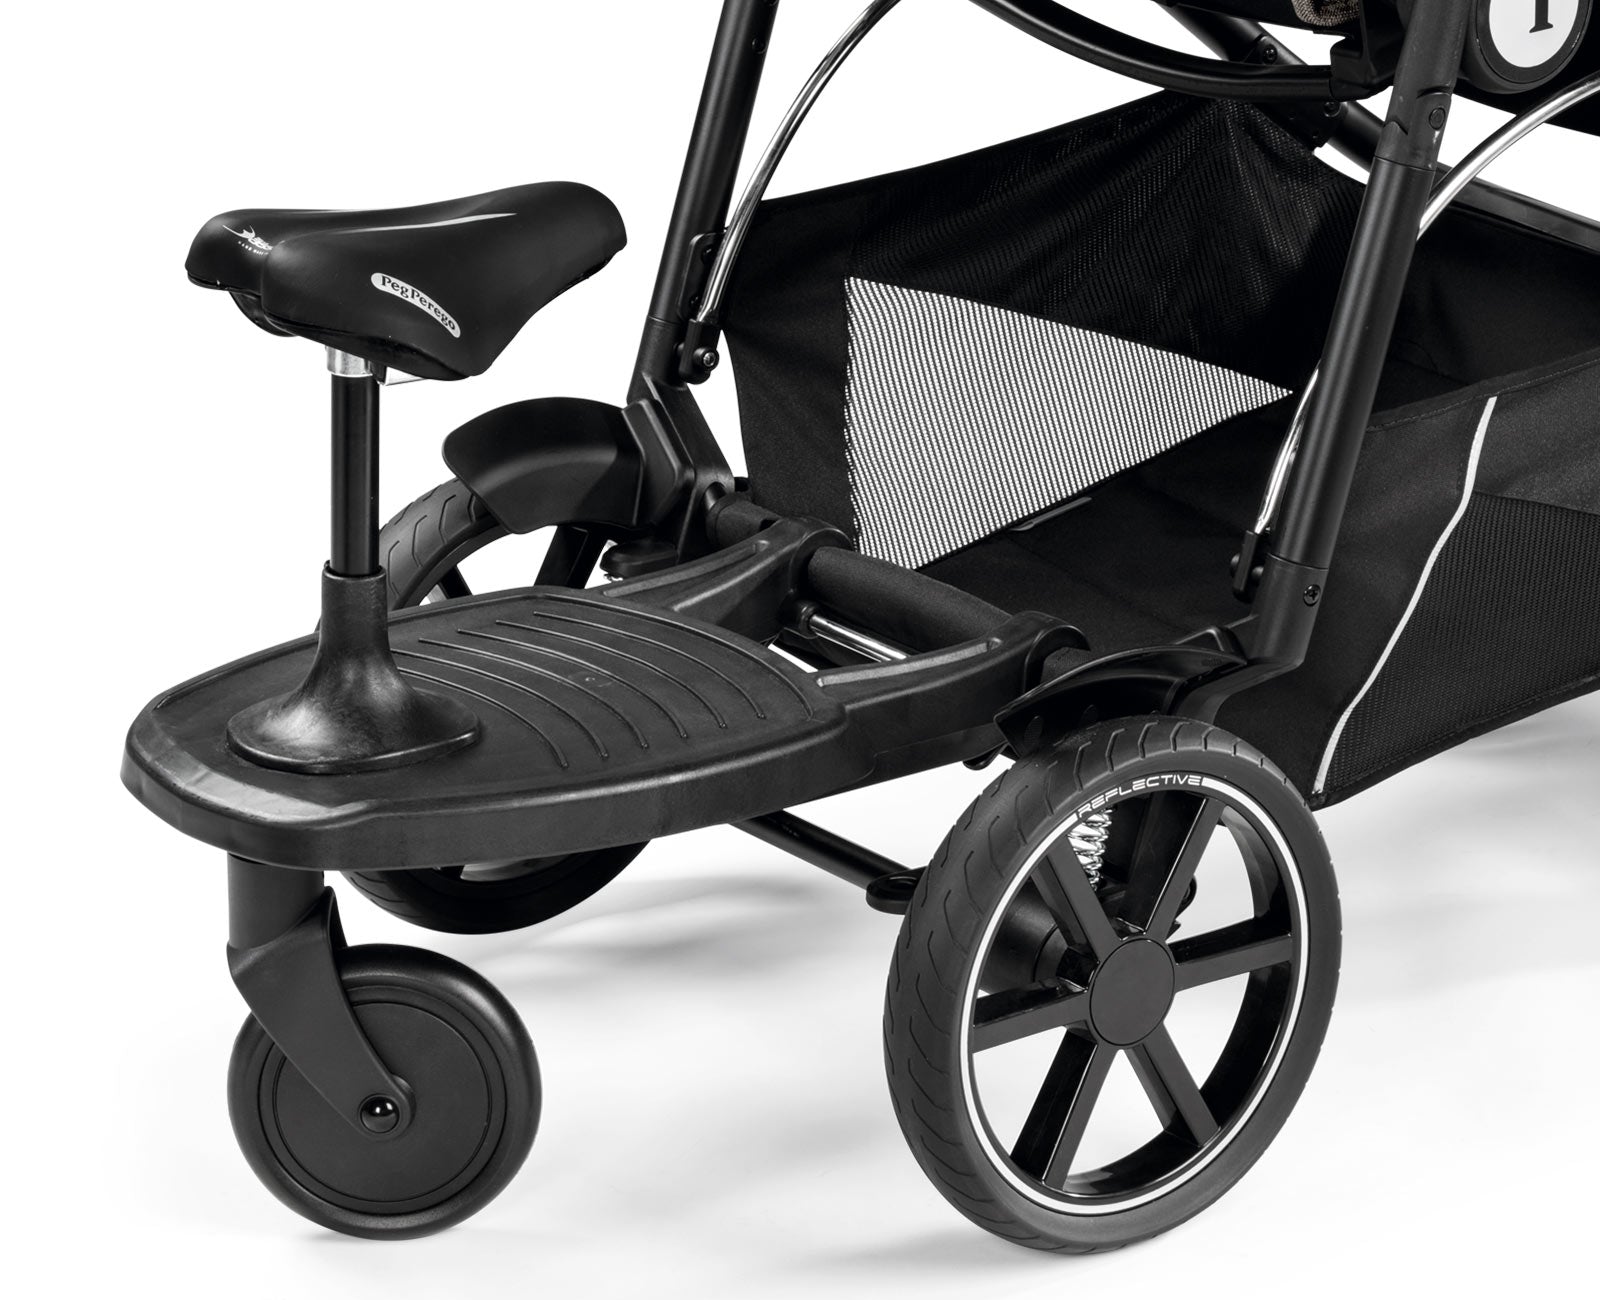 Peg Perego Ride With Me Board for Veloce & Vivace Strollers - ANB Baby -$100 - $300